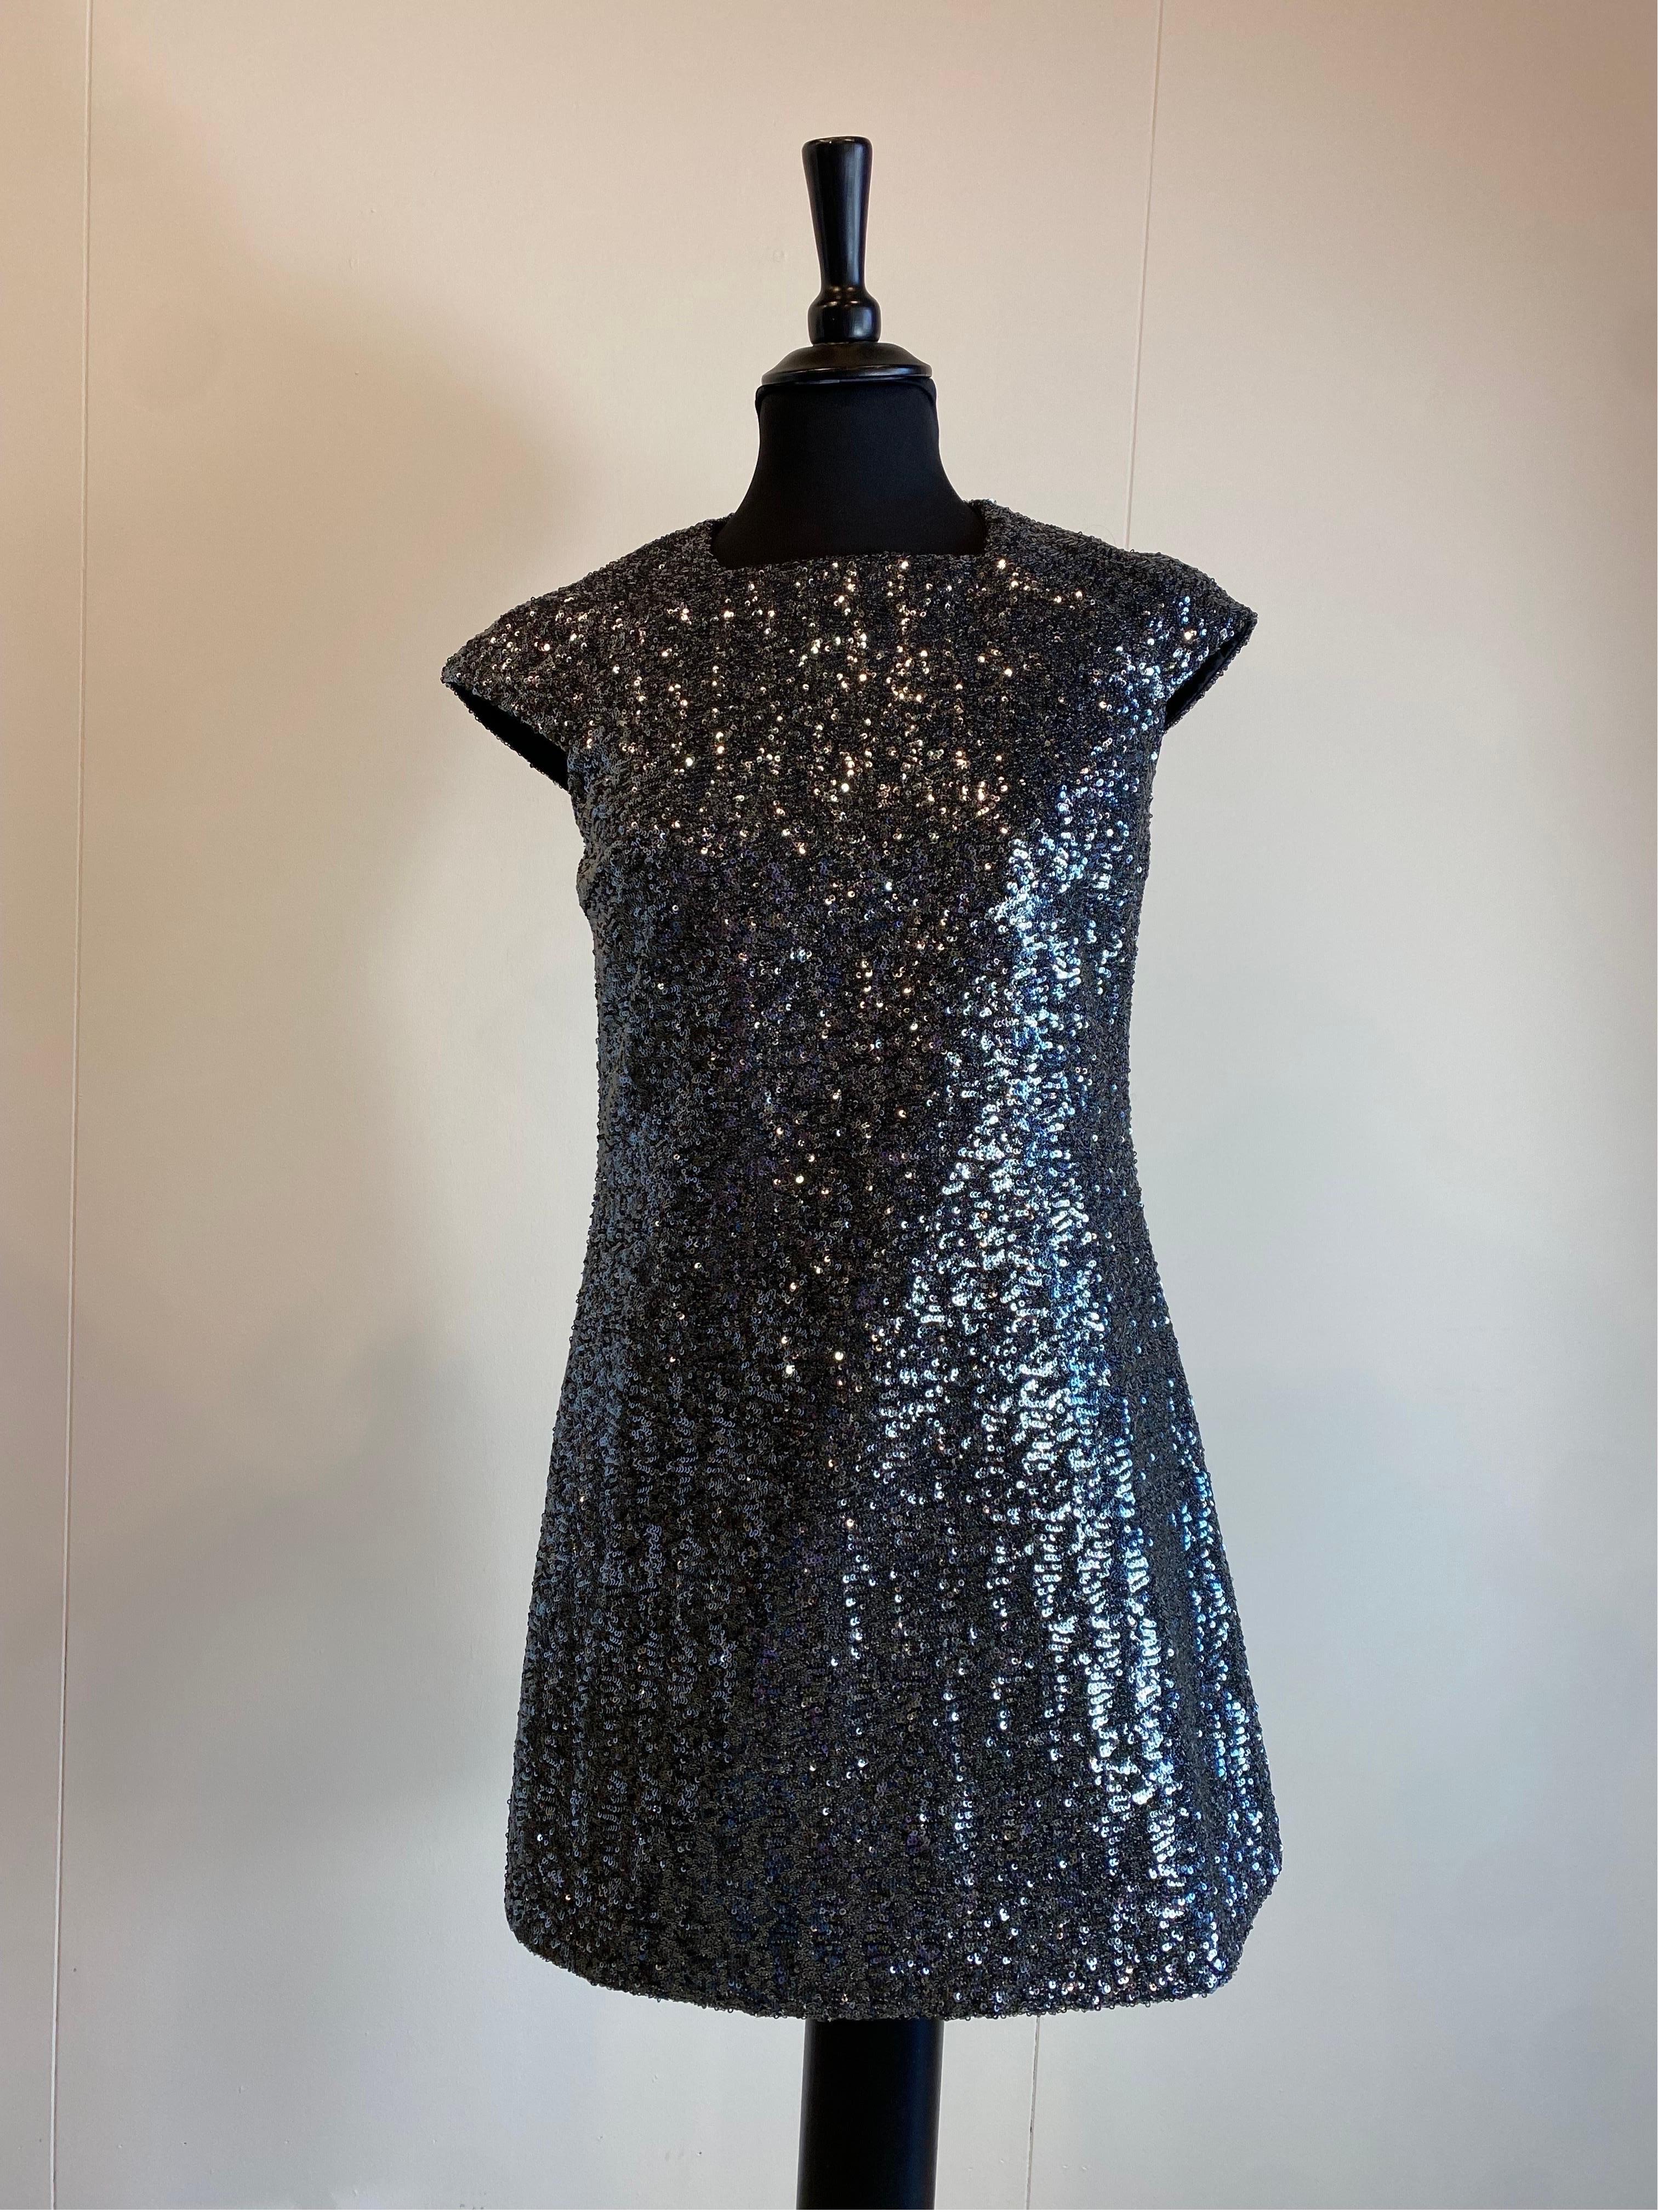 Saint Laurent Sequins Dress.
SS 2019 RTW collection
Made of polyester, lined with silk.
French size 38 which corresponds to an Italian 42
Shoulders 42 cm
Bust 45 cm
Waist 42cm
Length 82 cm
New, with label.